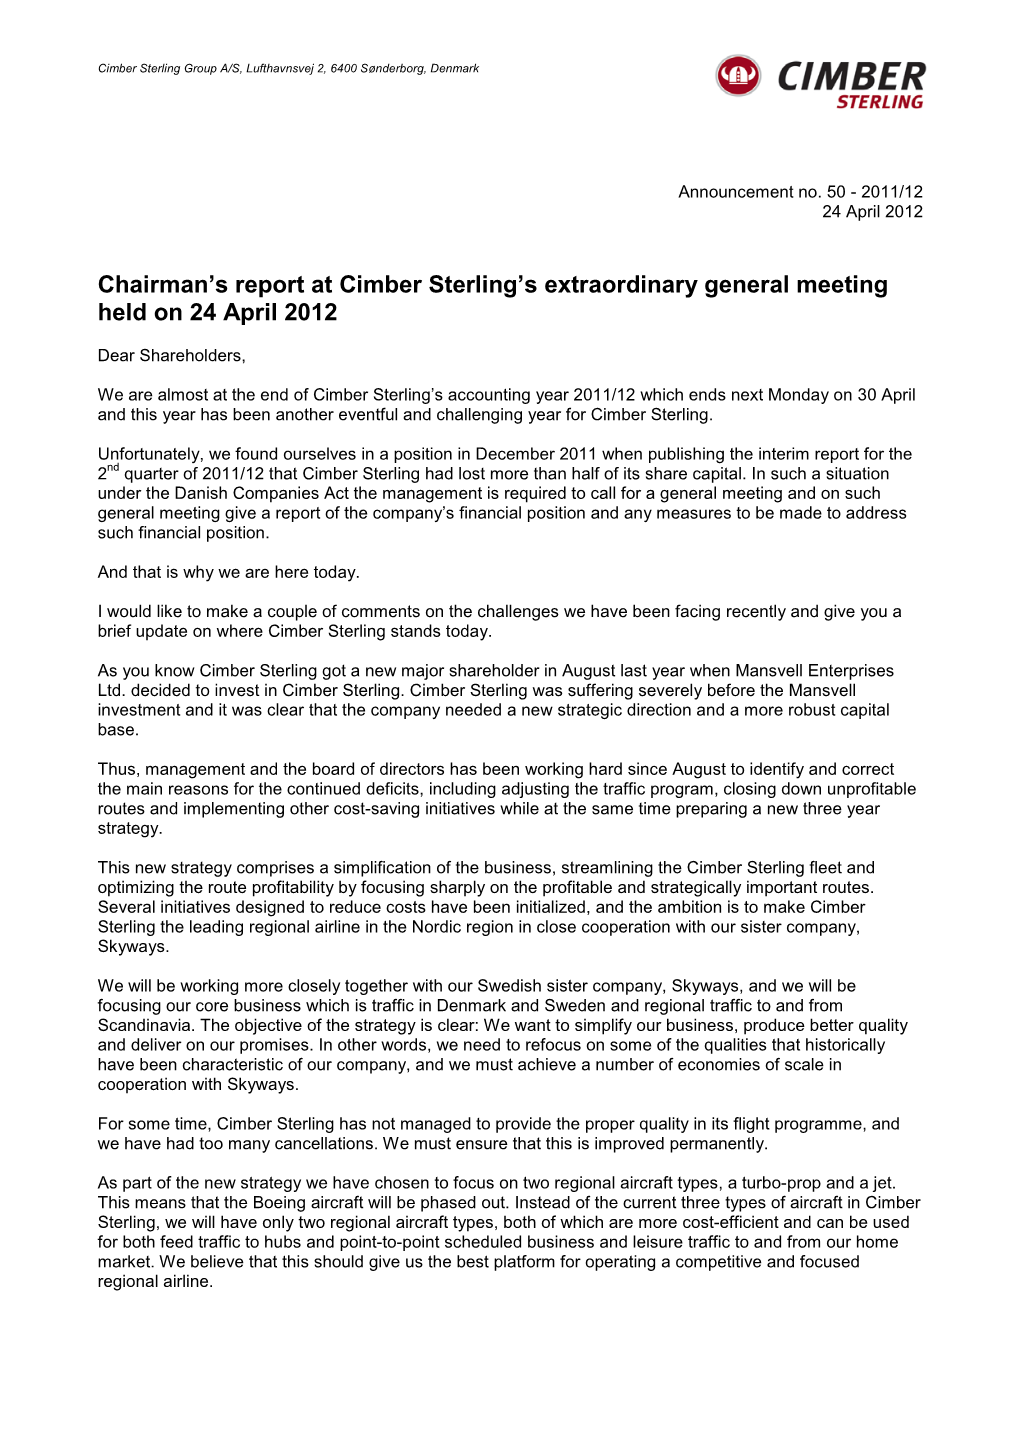 Chairman's Report at Cimber Sterling's Extraordinary General